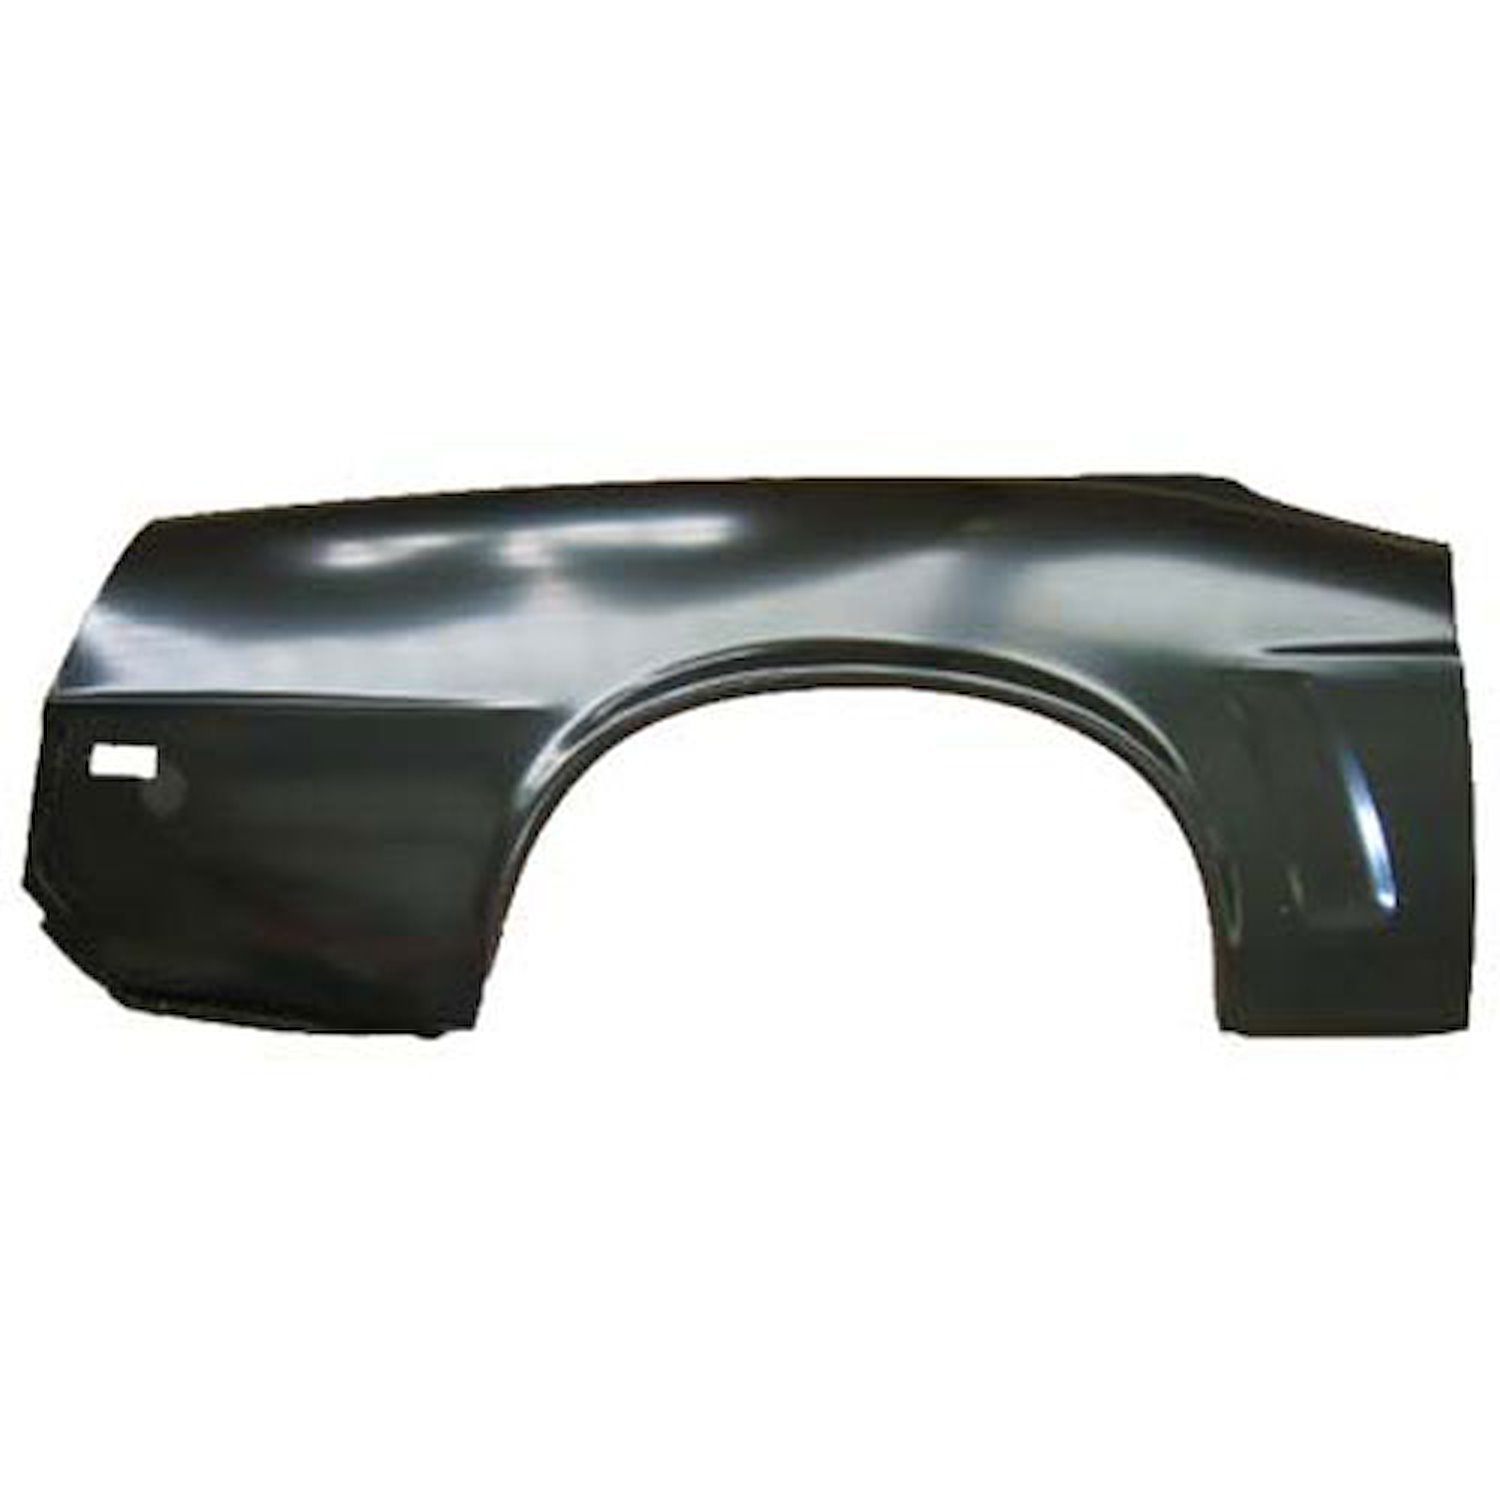 QP20-691R Quarter Panel Skin 1969 Ford Mustang Coupe/Convertible RH